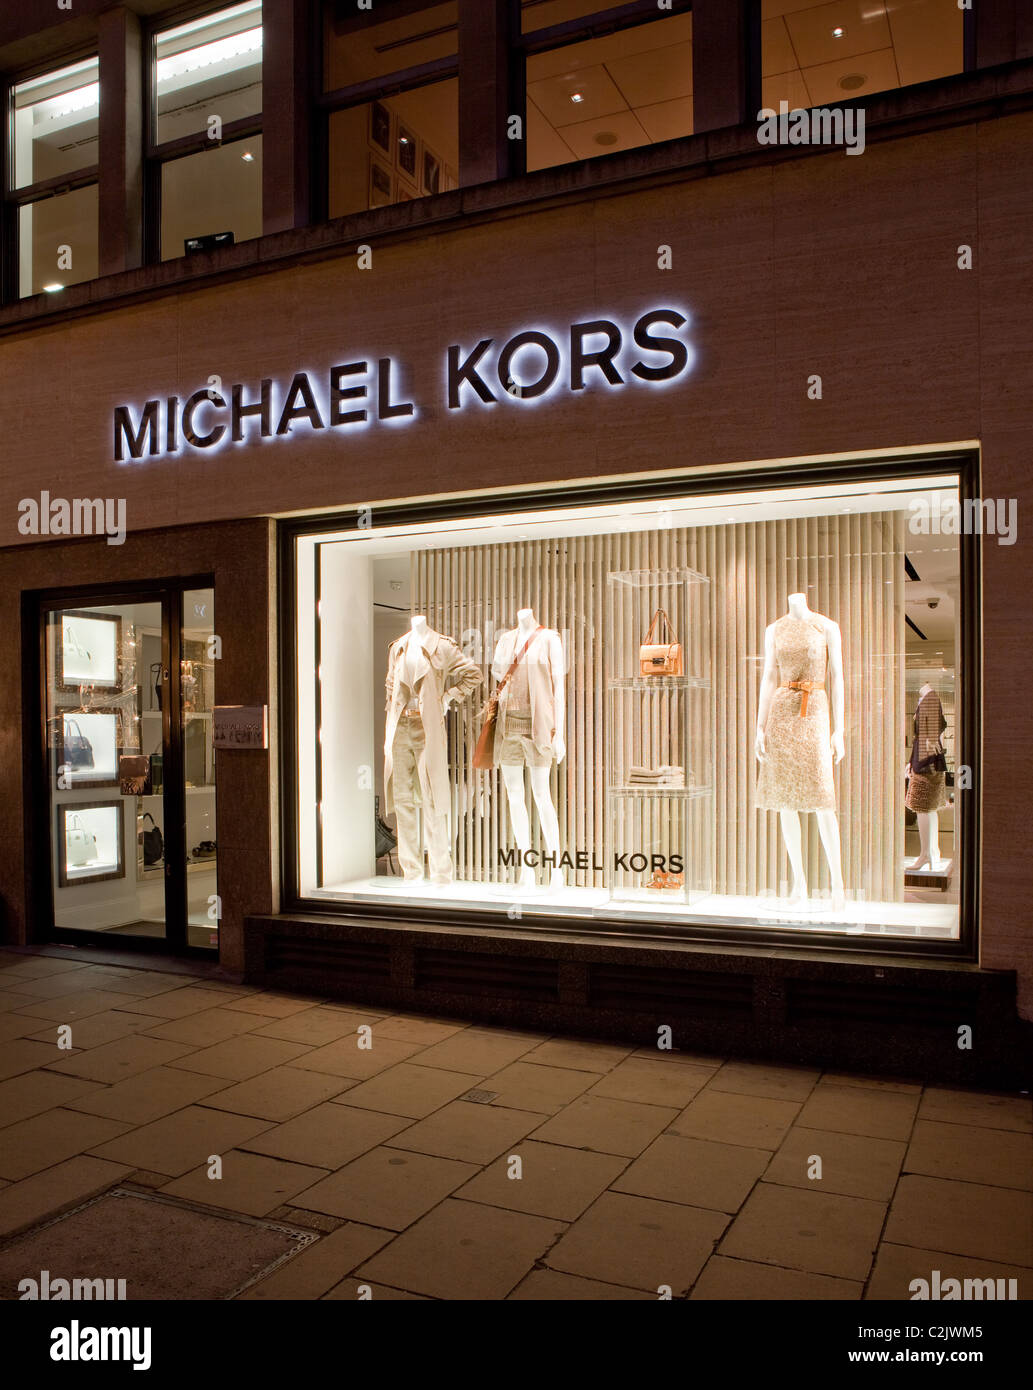 Michael Kors Storefront in Meadowhall, Sheffield, South Yorkshire, UK  Showing the Latest Fashion Editorial Stock Image - Image of label, indoor:  149431399